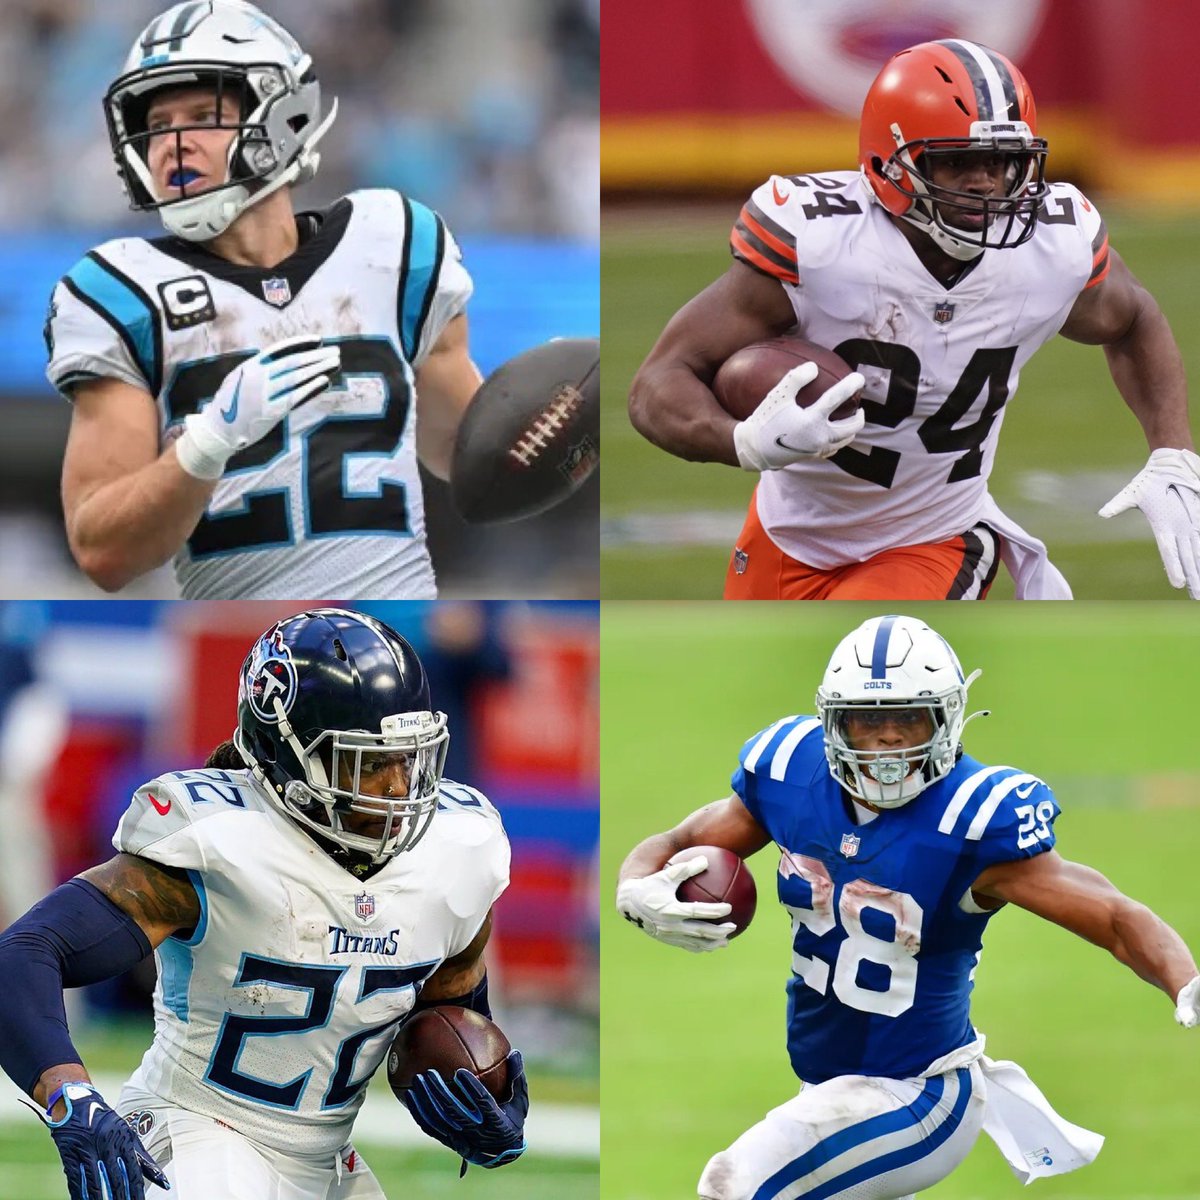 Beerly Football on Twitter "Who is the best RB in the NFL right now 👀"